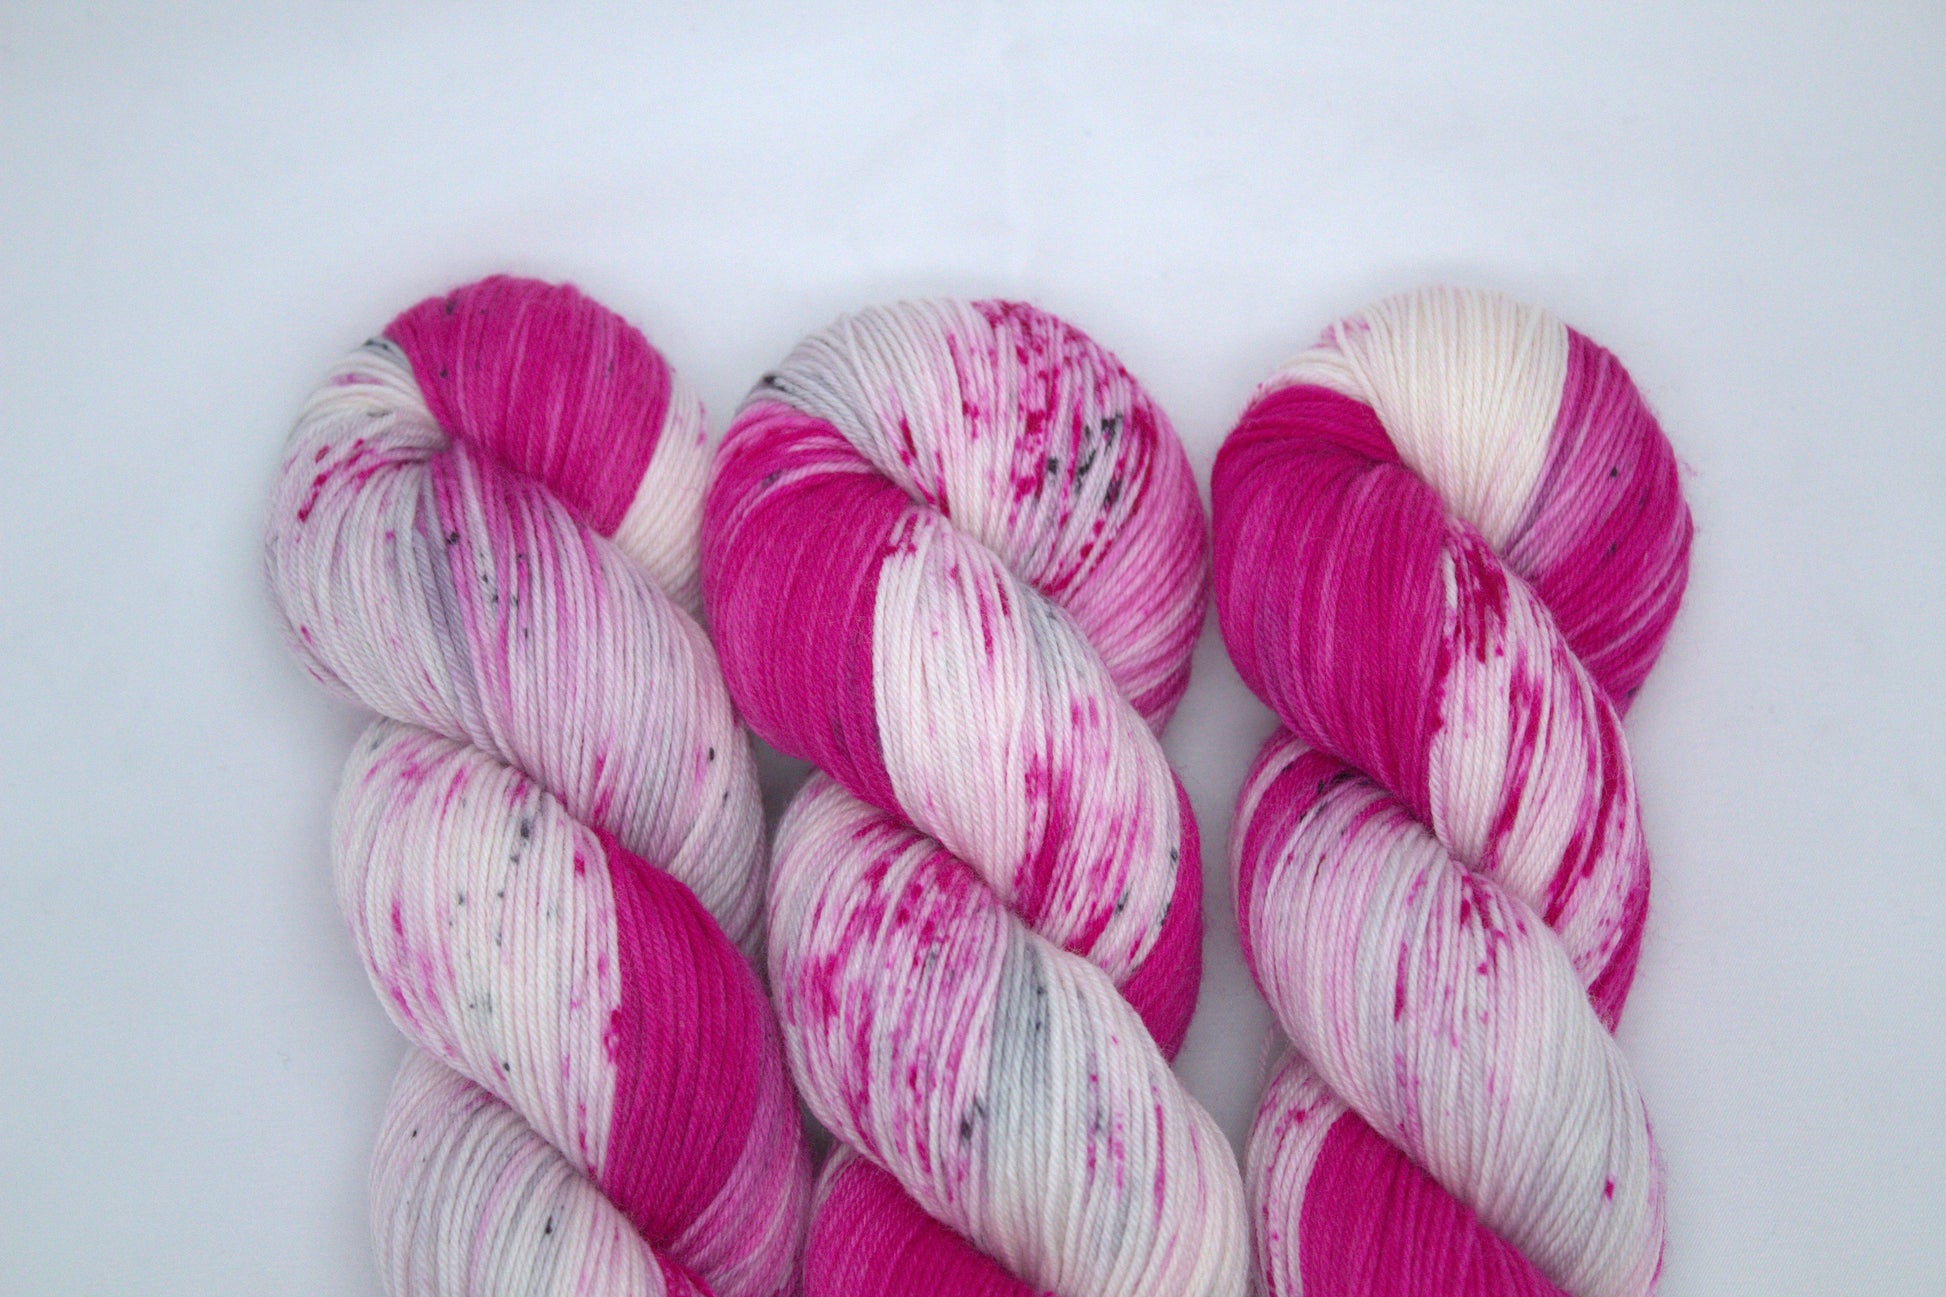 three twisted skeins bright pink variegated yarn with pink and dark gray speckles on white background.